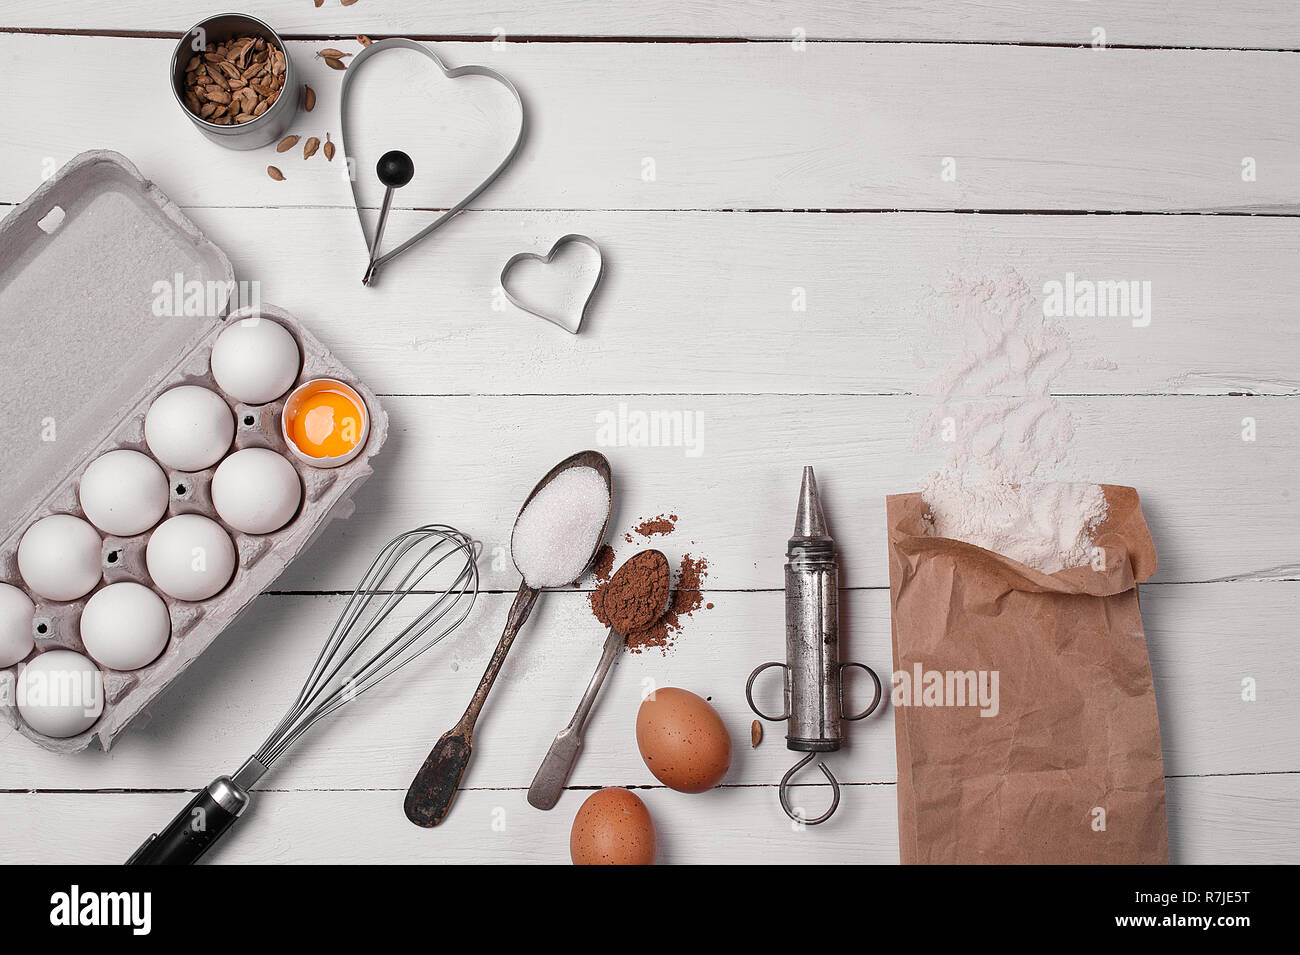 Backing background with ingredients for baking and kitchen tools. Stock Photo